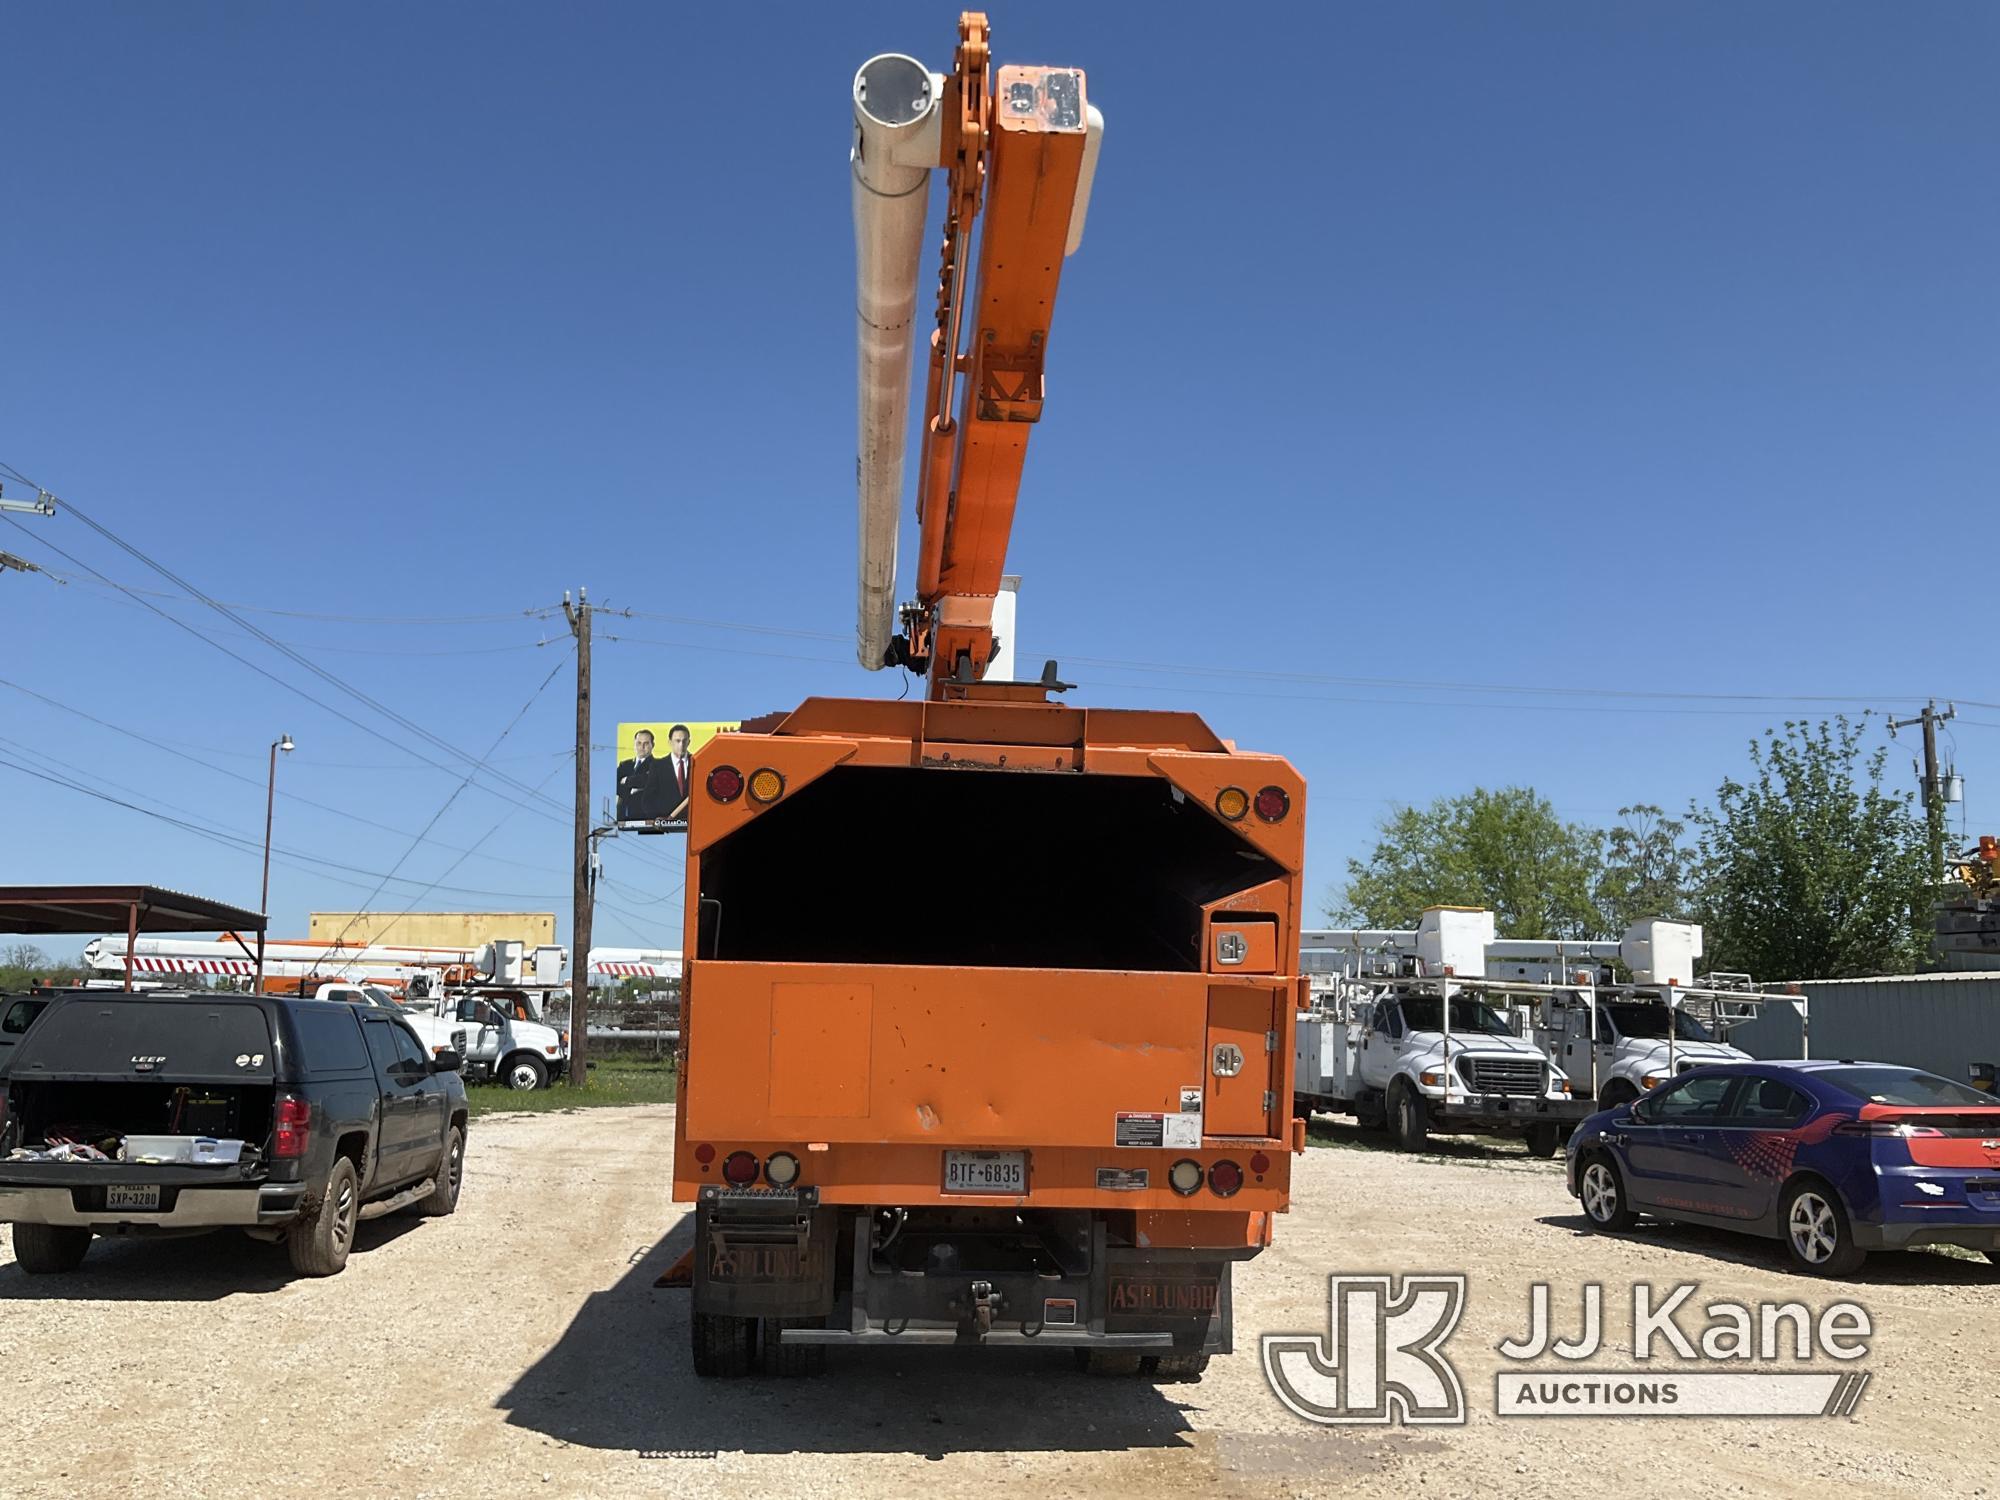 (San Antonio, TX) Altec LR756, Over-Center Bucket Truck mounted behind cab on 2012 Ford F750 Chipper